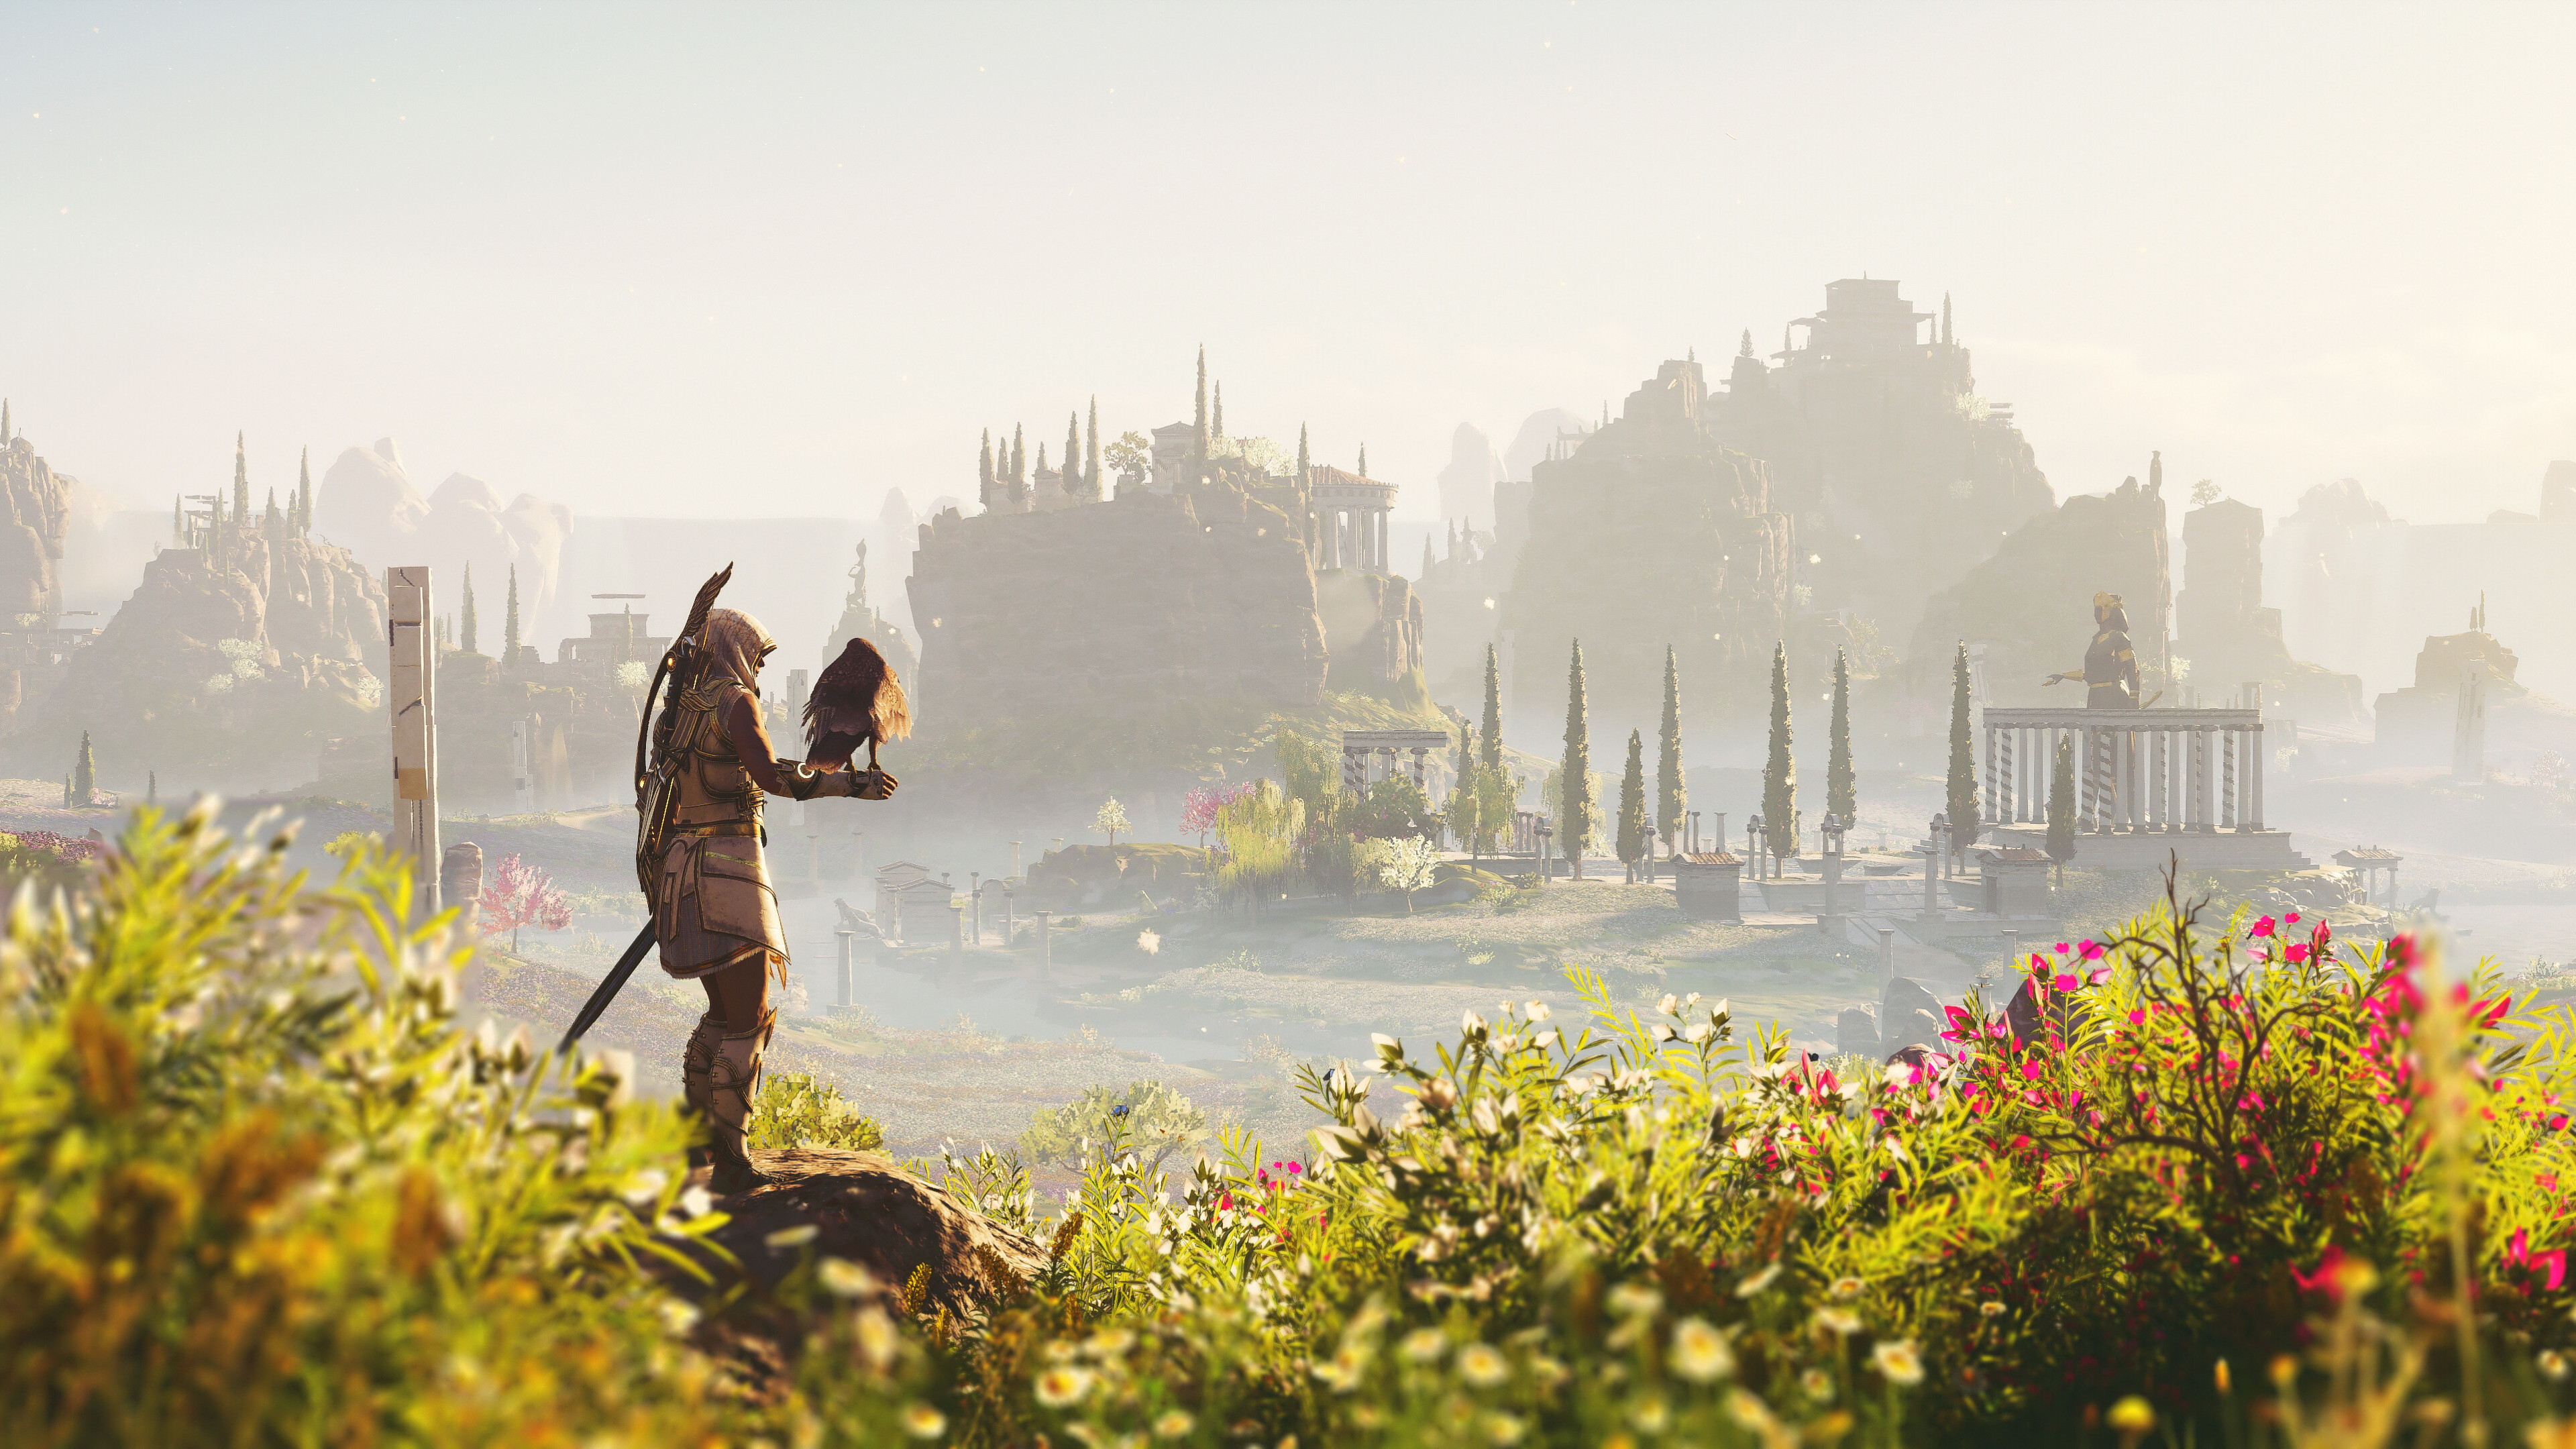 Assassins Creed Odyssey imo is a great game. As an open world rpg